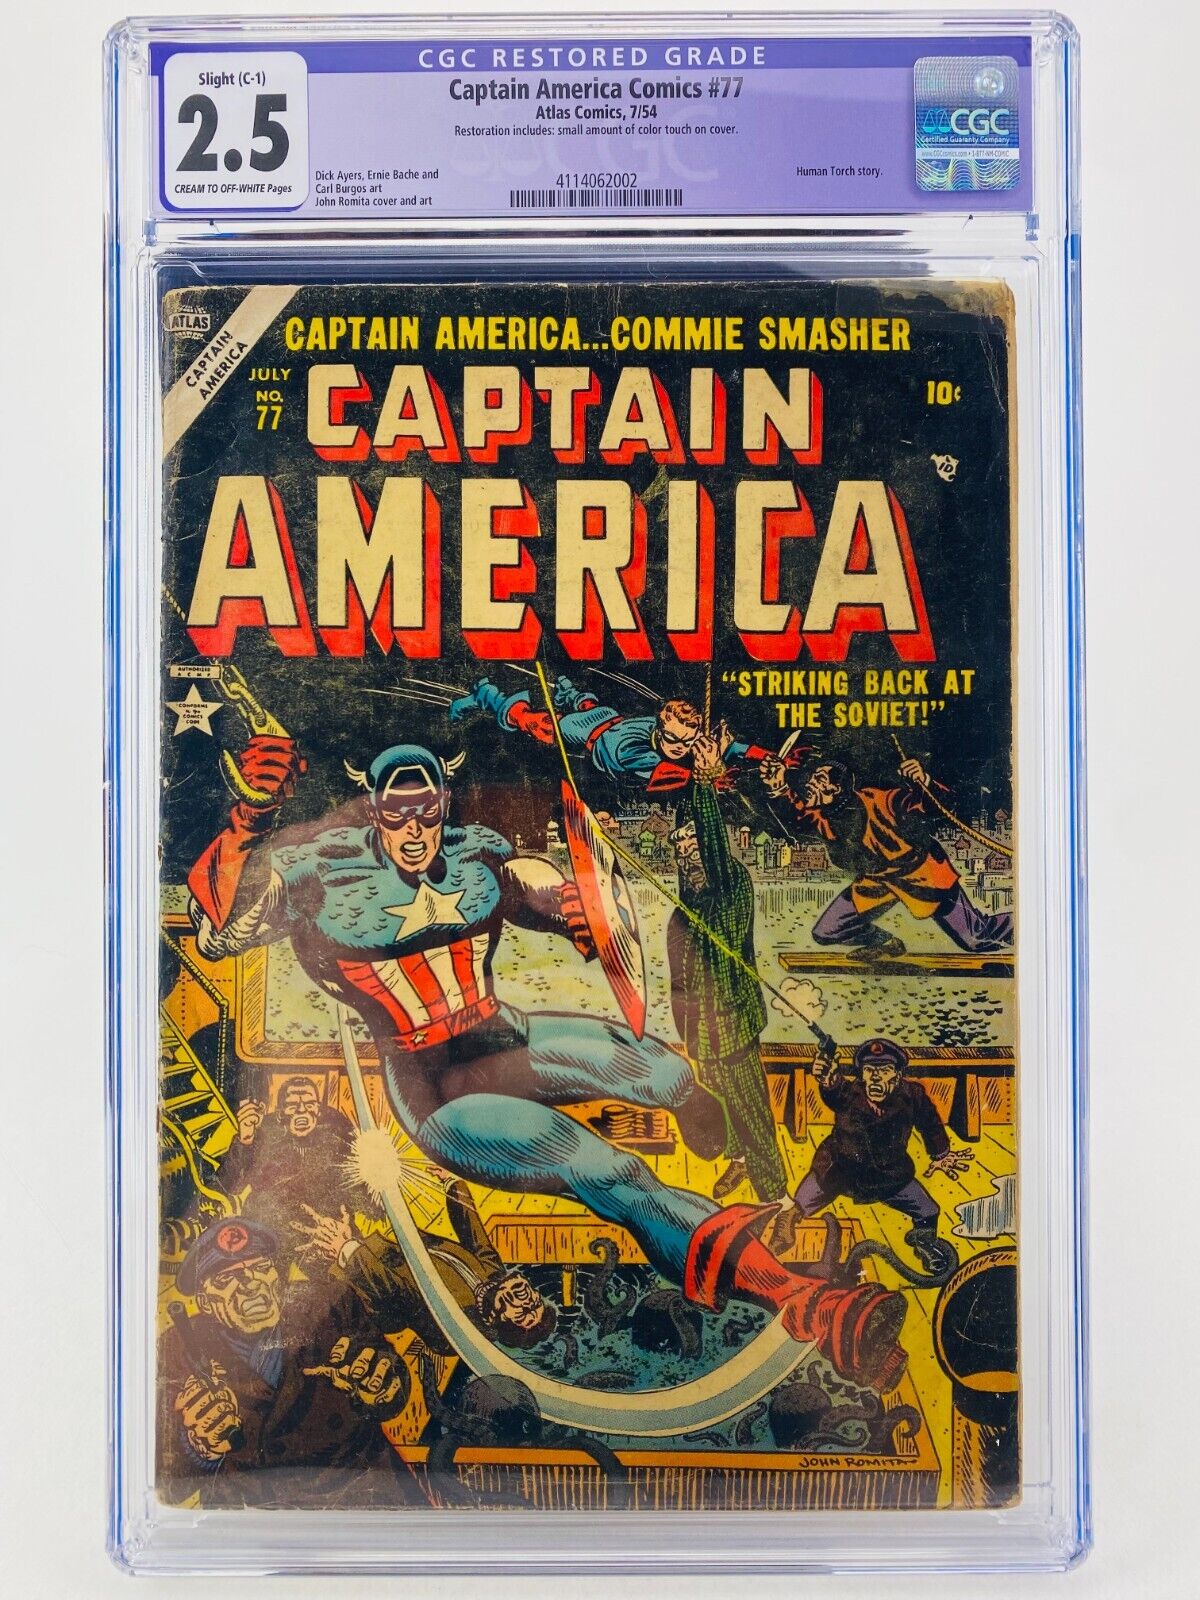 RARE  Captain America Comics 77  1954 CGC 25  Timely  Human Torch story